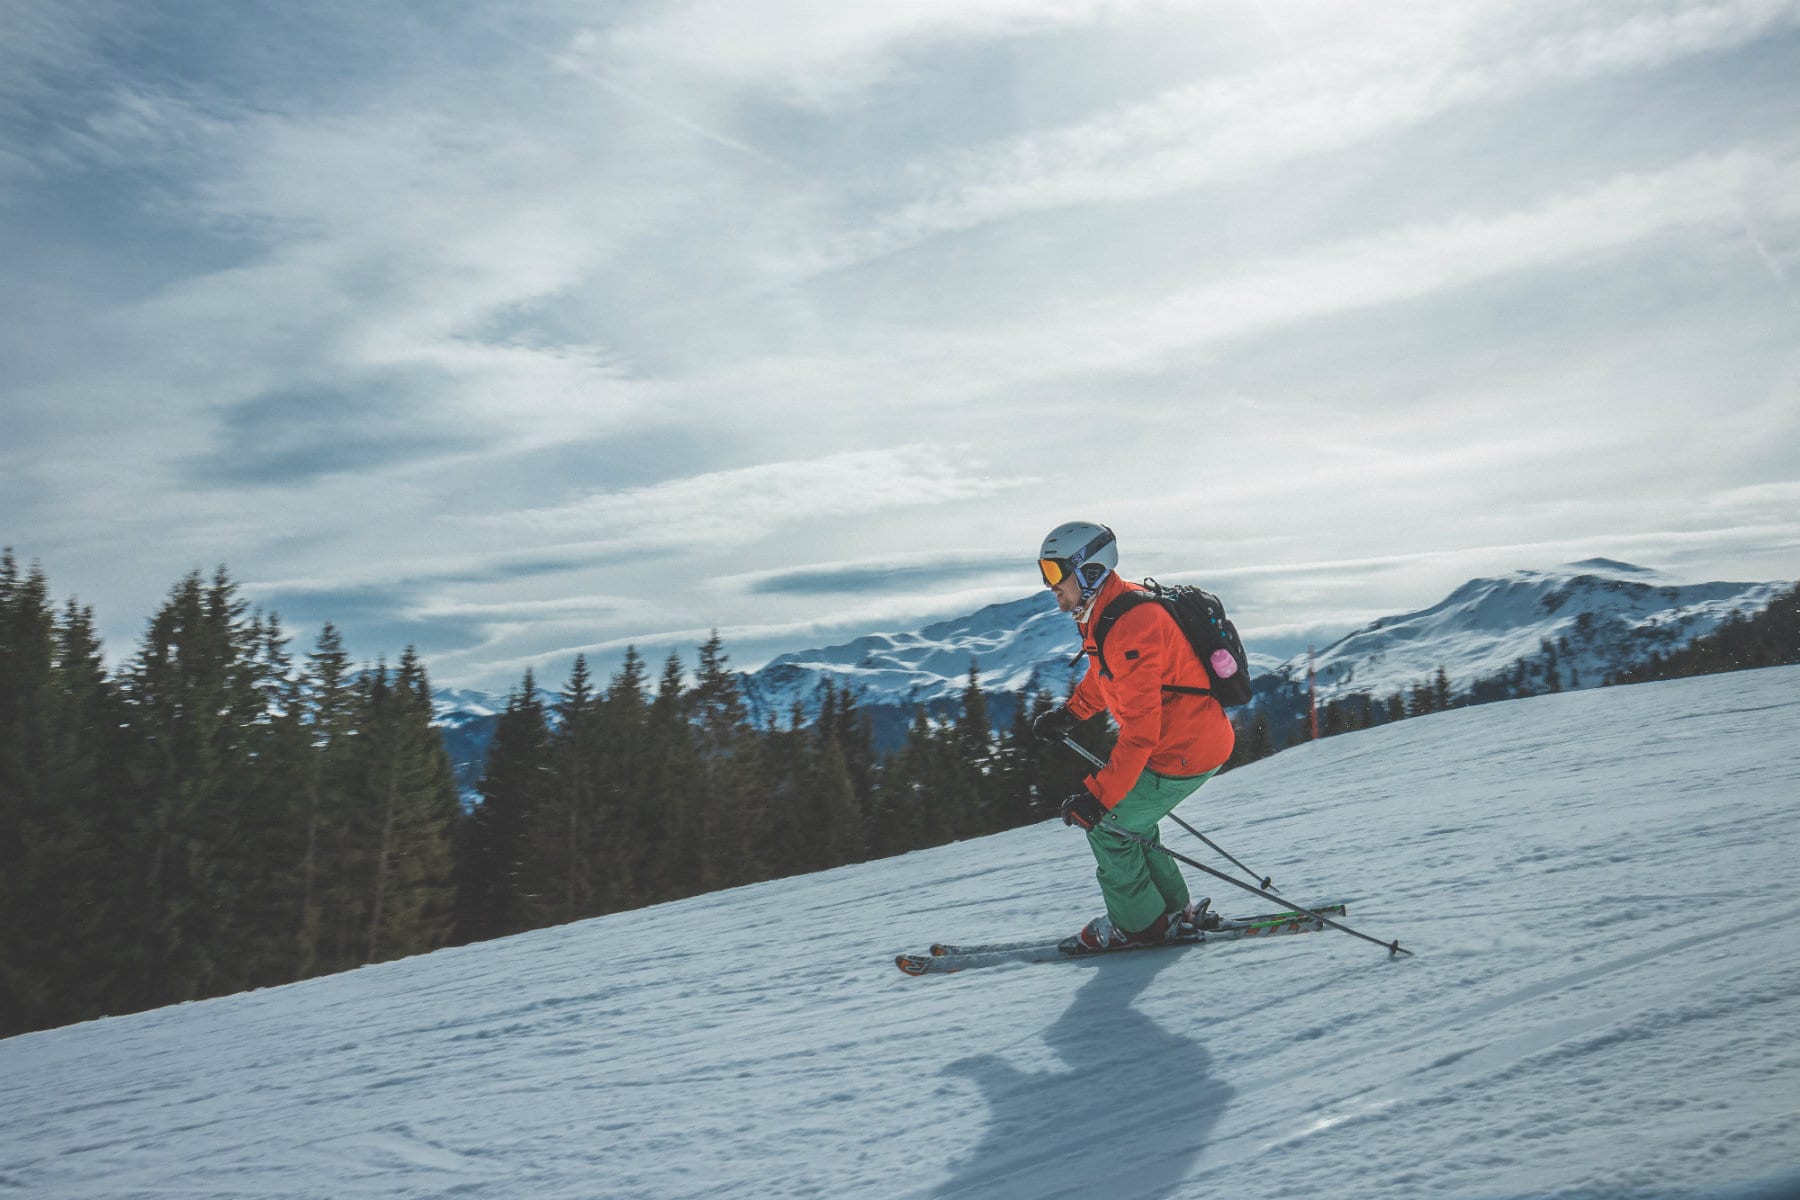 Best Exercises for Skiing | Ski Exercises You Can Do At Home